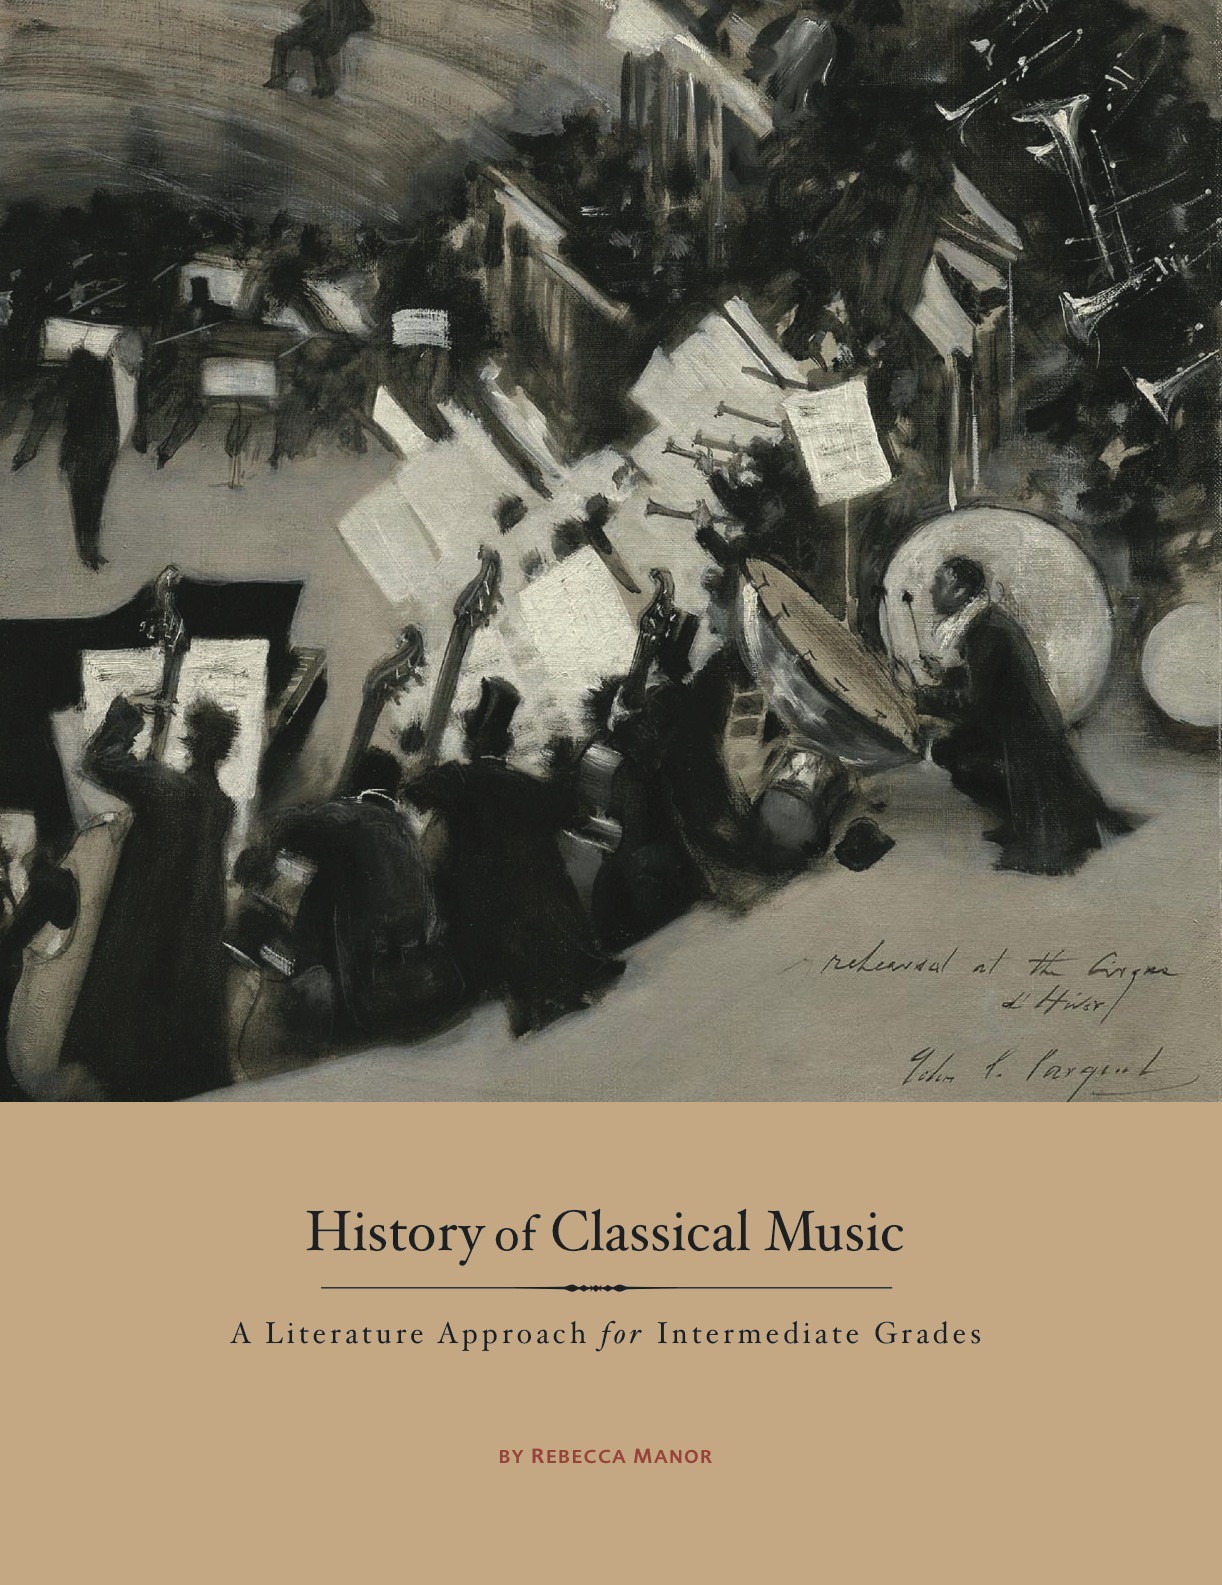 History of Classical Music Teacher Guide